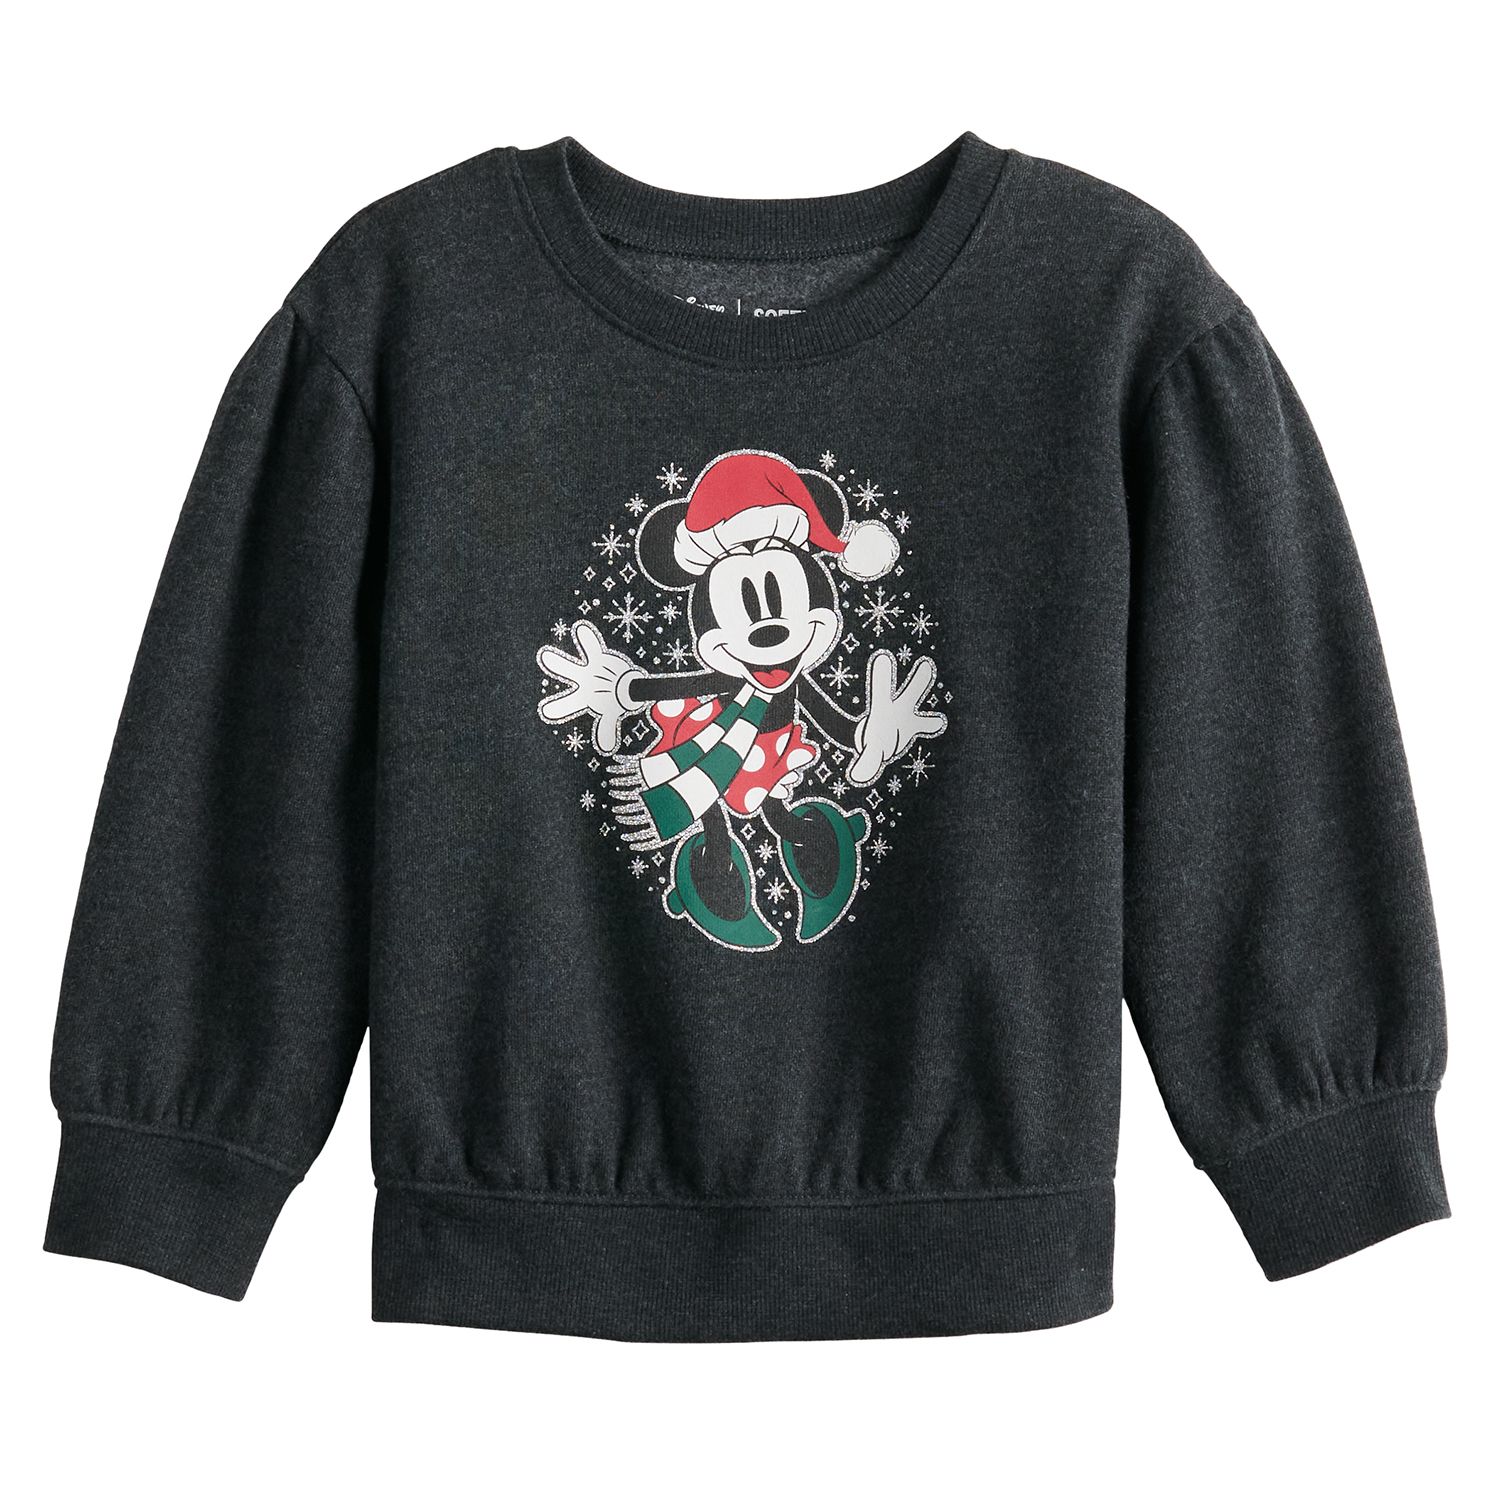 Image for Disney/Jumping Beans Disney's Minnie Mouse Toddler Girl Holiday Fleece Sweatshirt by Jumping Beans® at Kohl's.